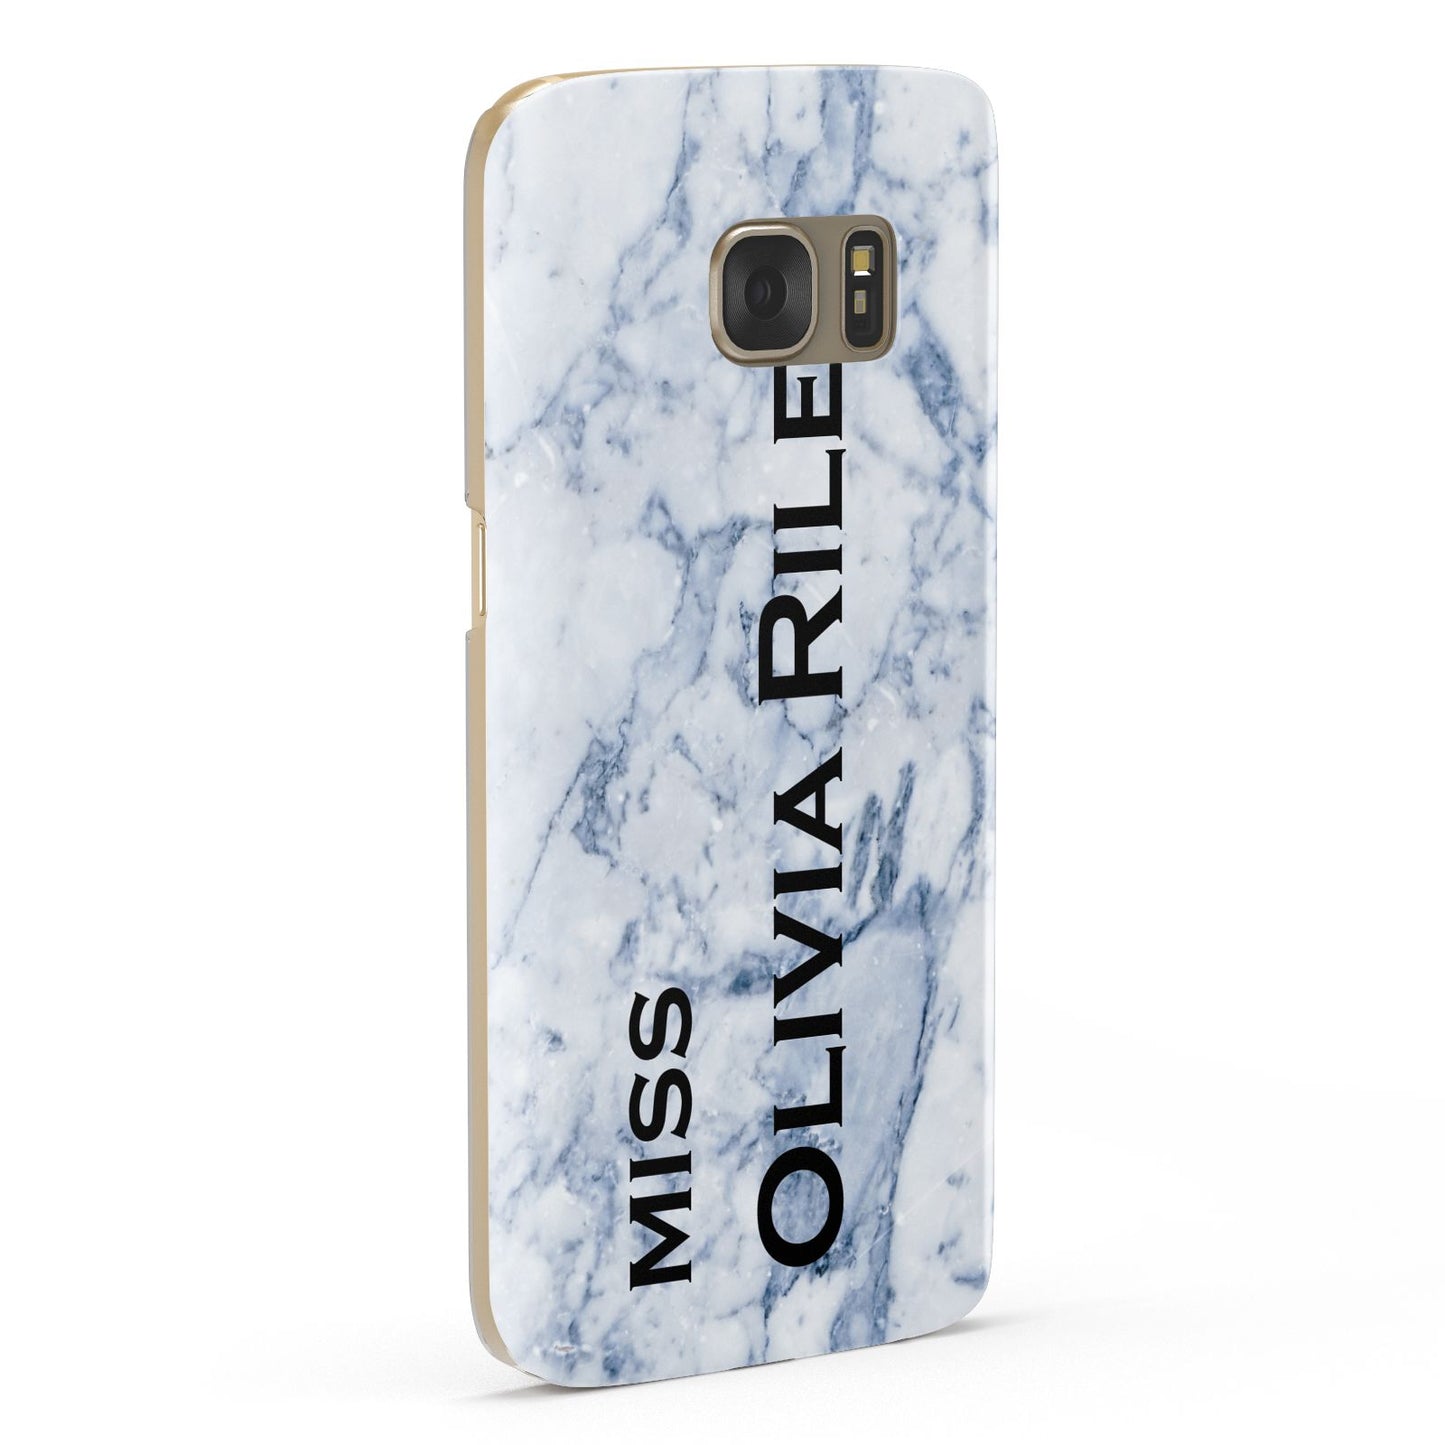 Full Name Grey Marble Samsung Galaxy Case Fourty Five Degrees